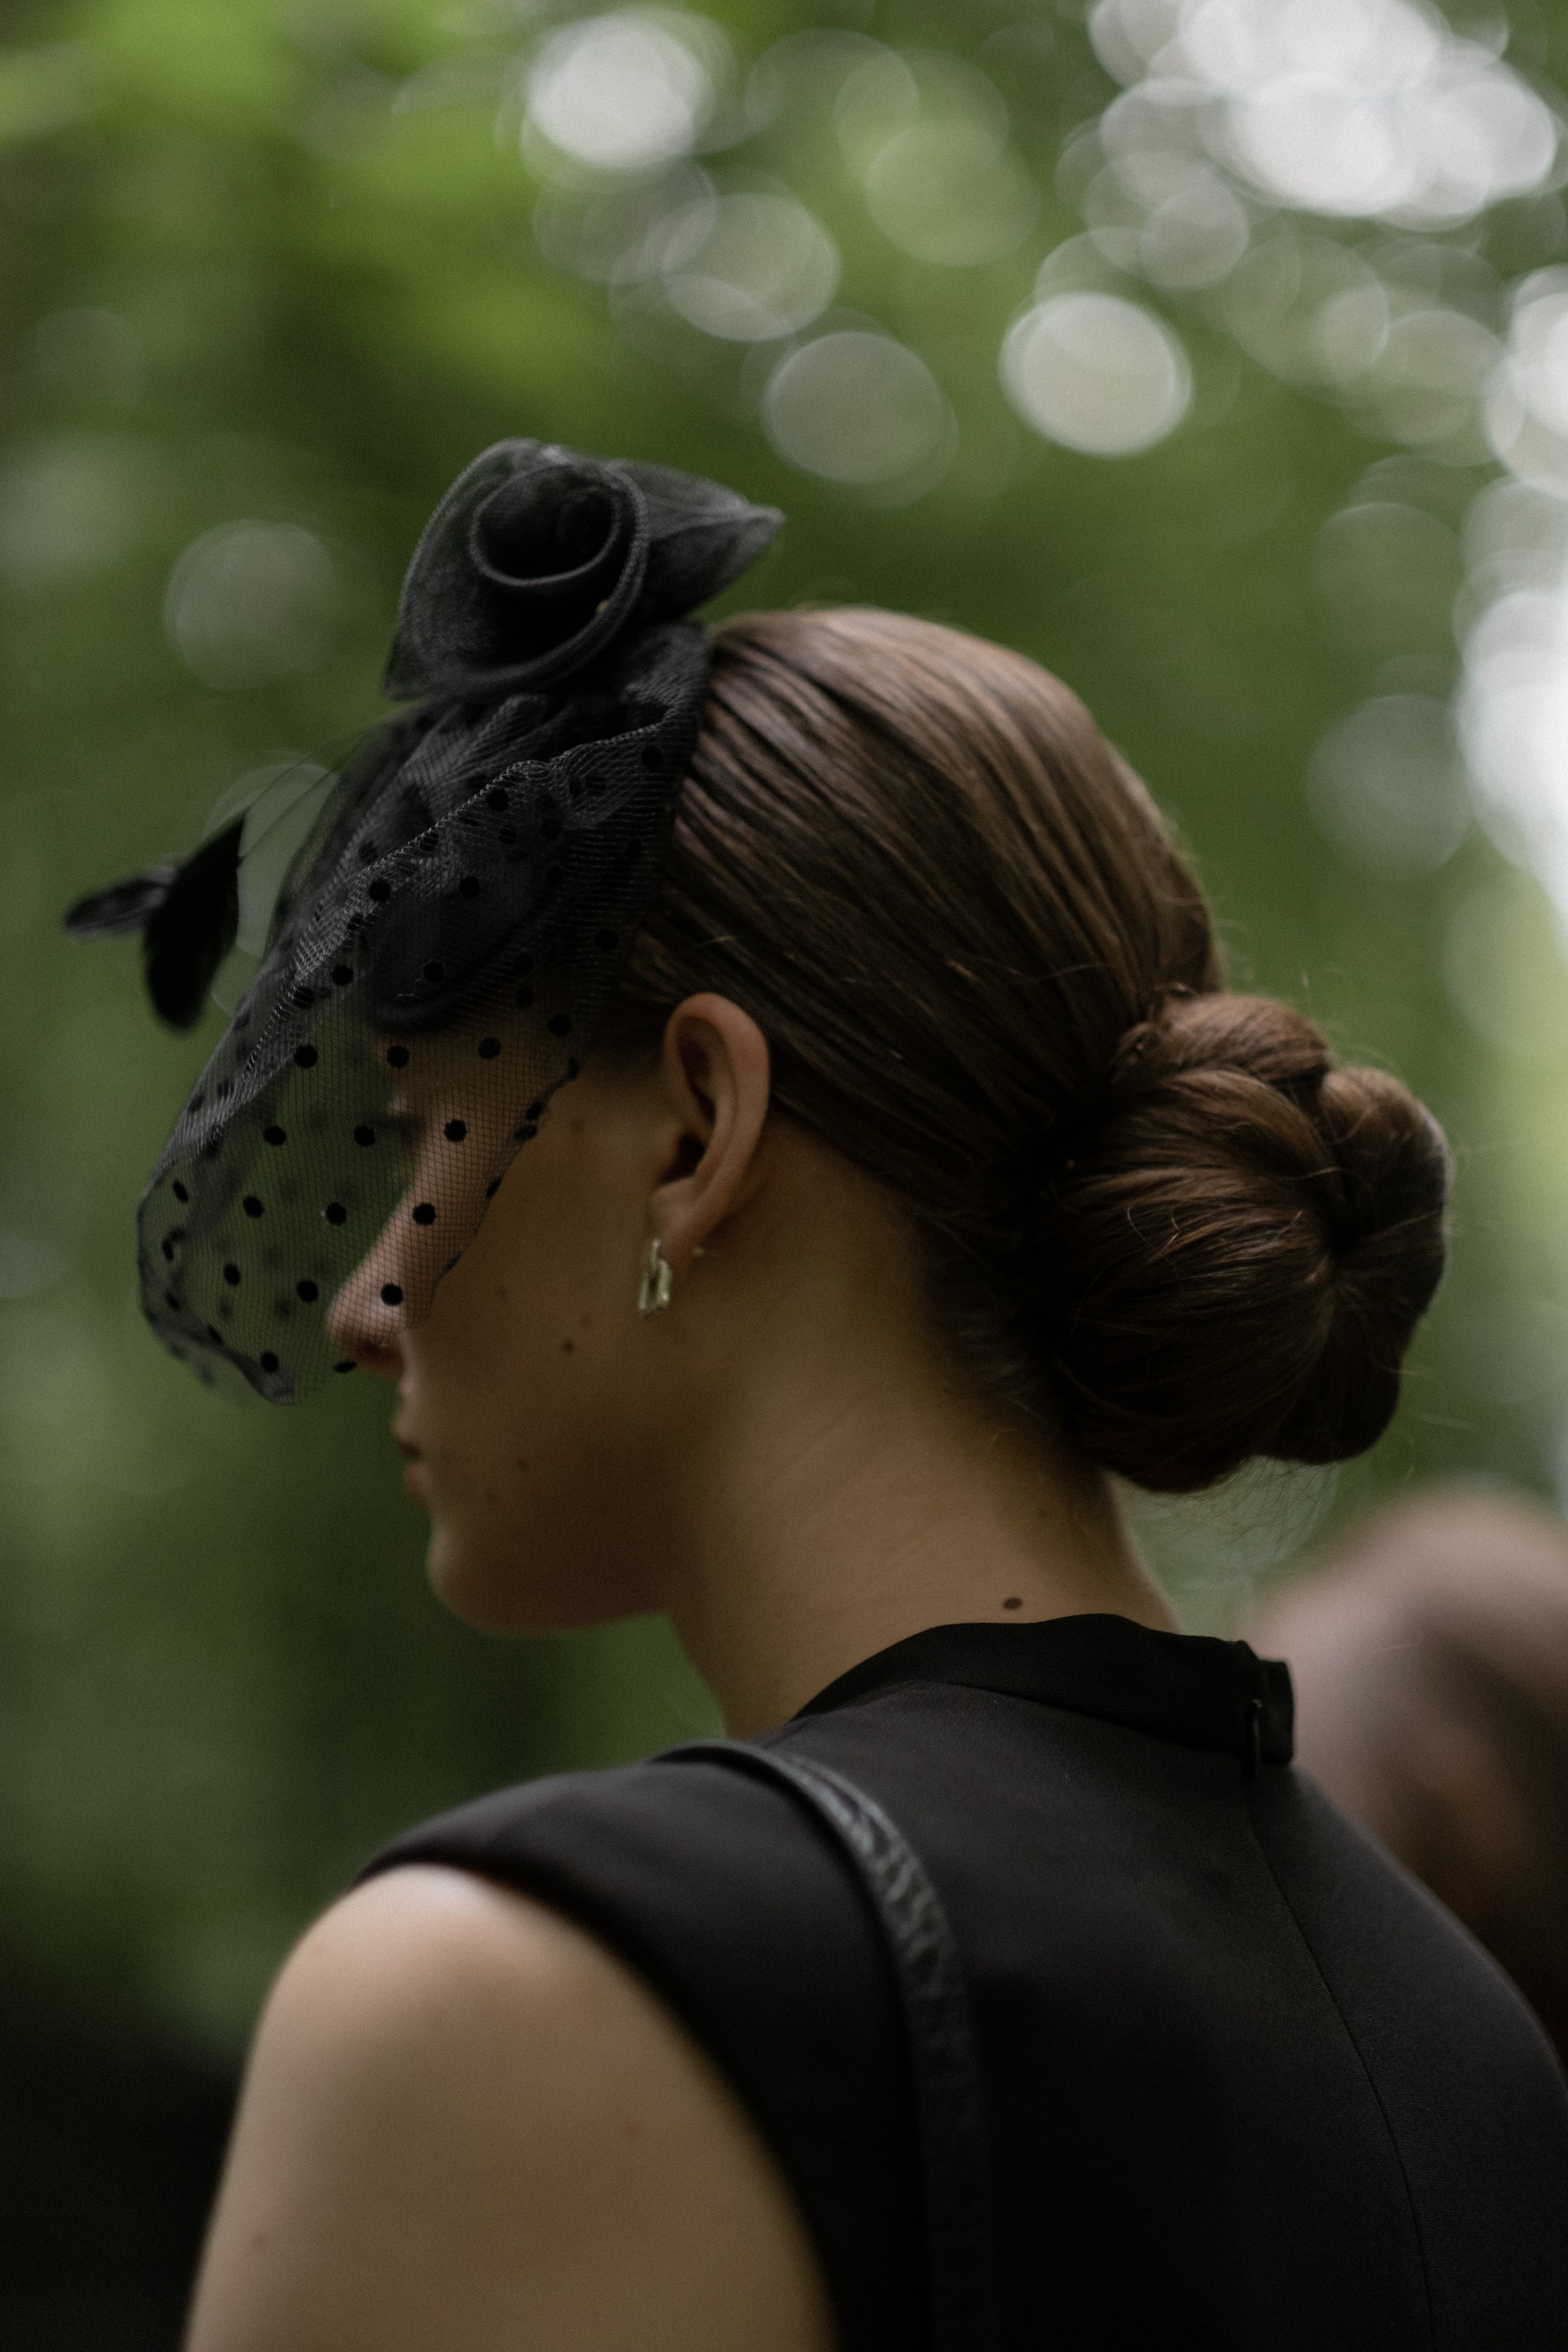 A woman wearing black is pictured attending a funeral | Source: Pexels